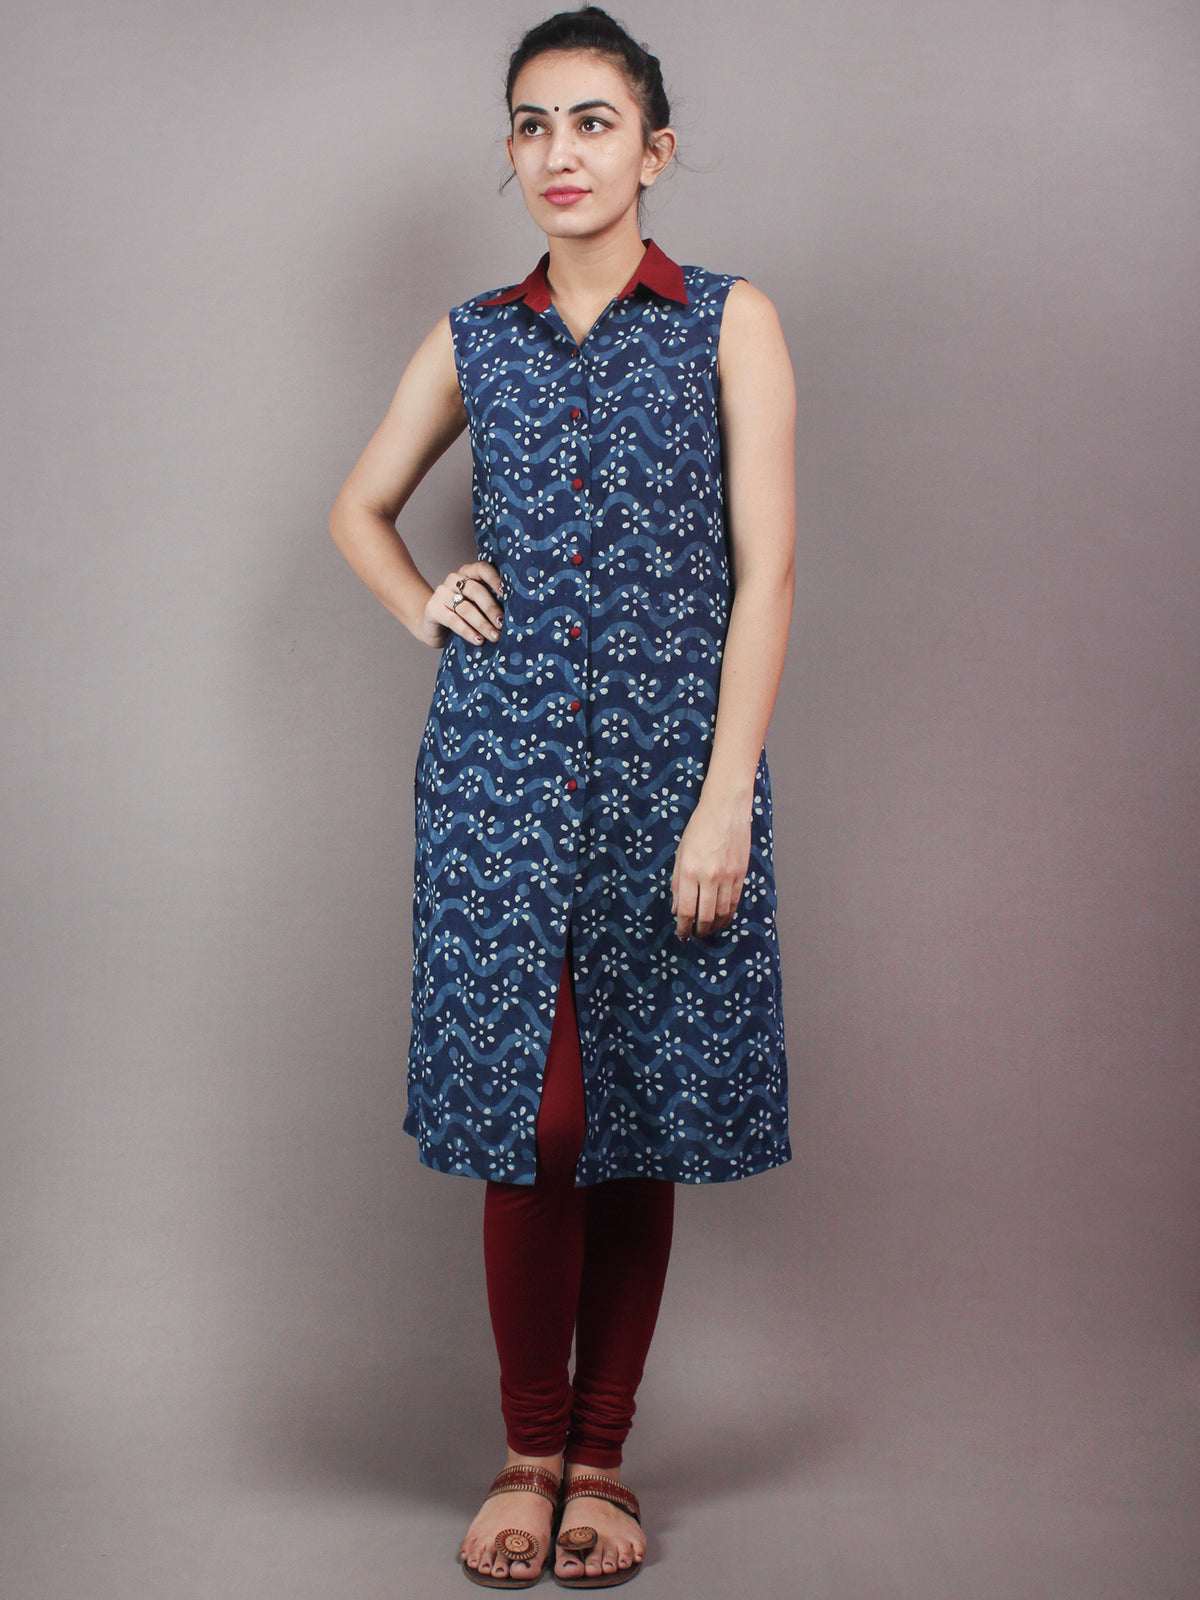 Indigo Ivory Maroon Hand Block Printed Kurti With Open Front With Buttons - K02A17001